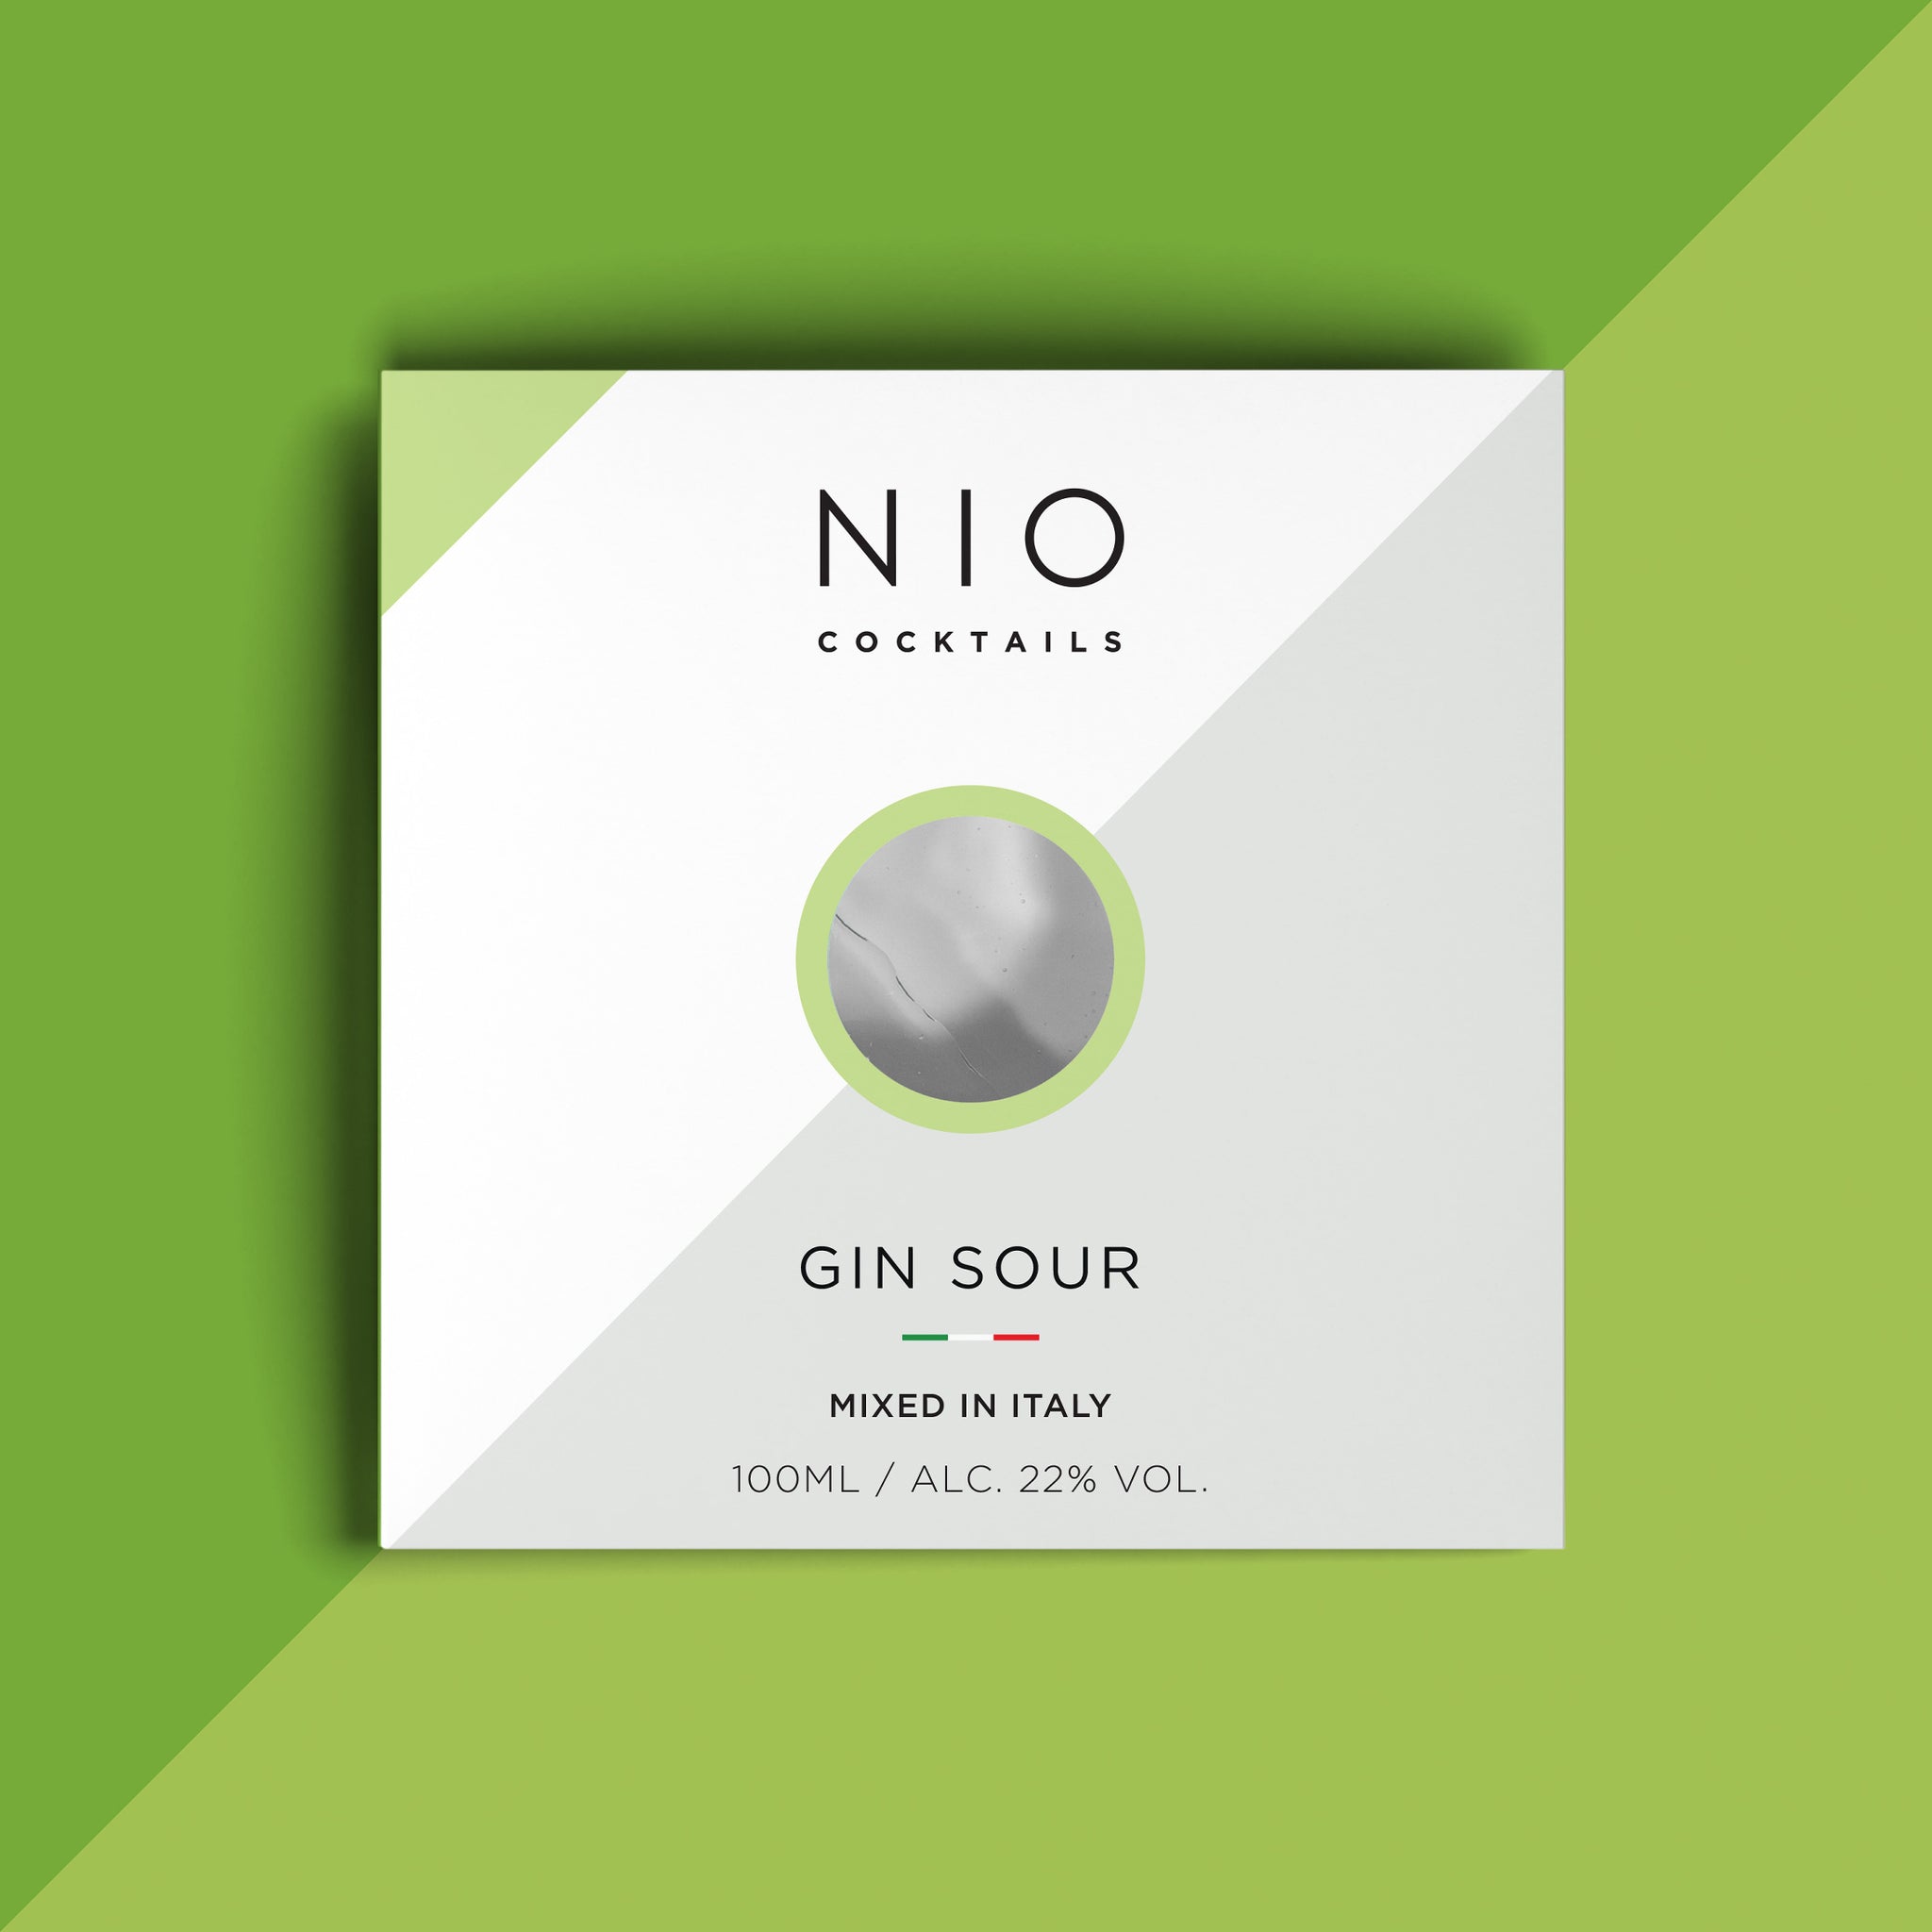 GIN SOUR COCKTAIL